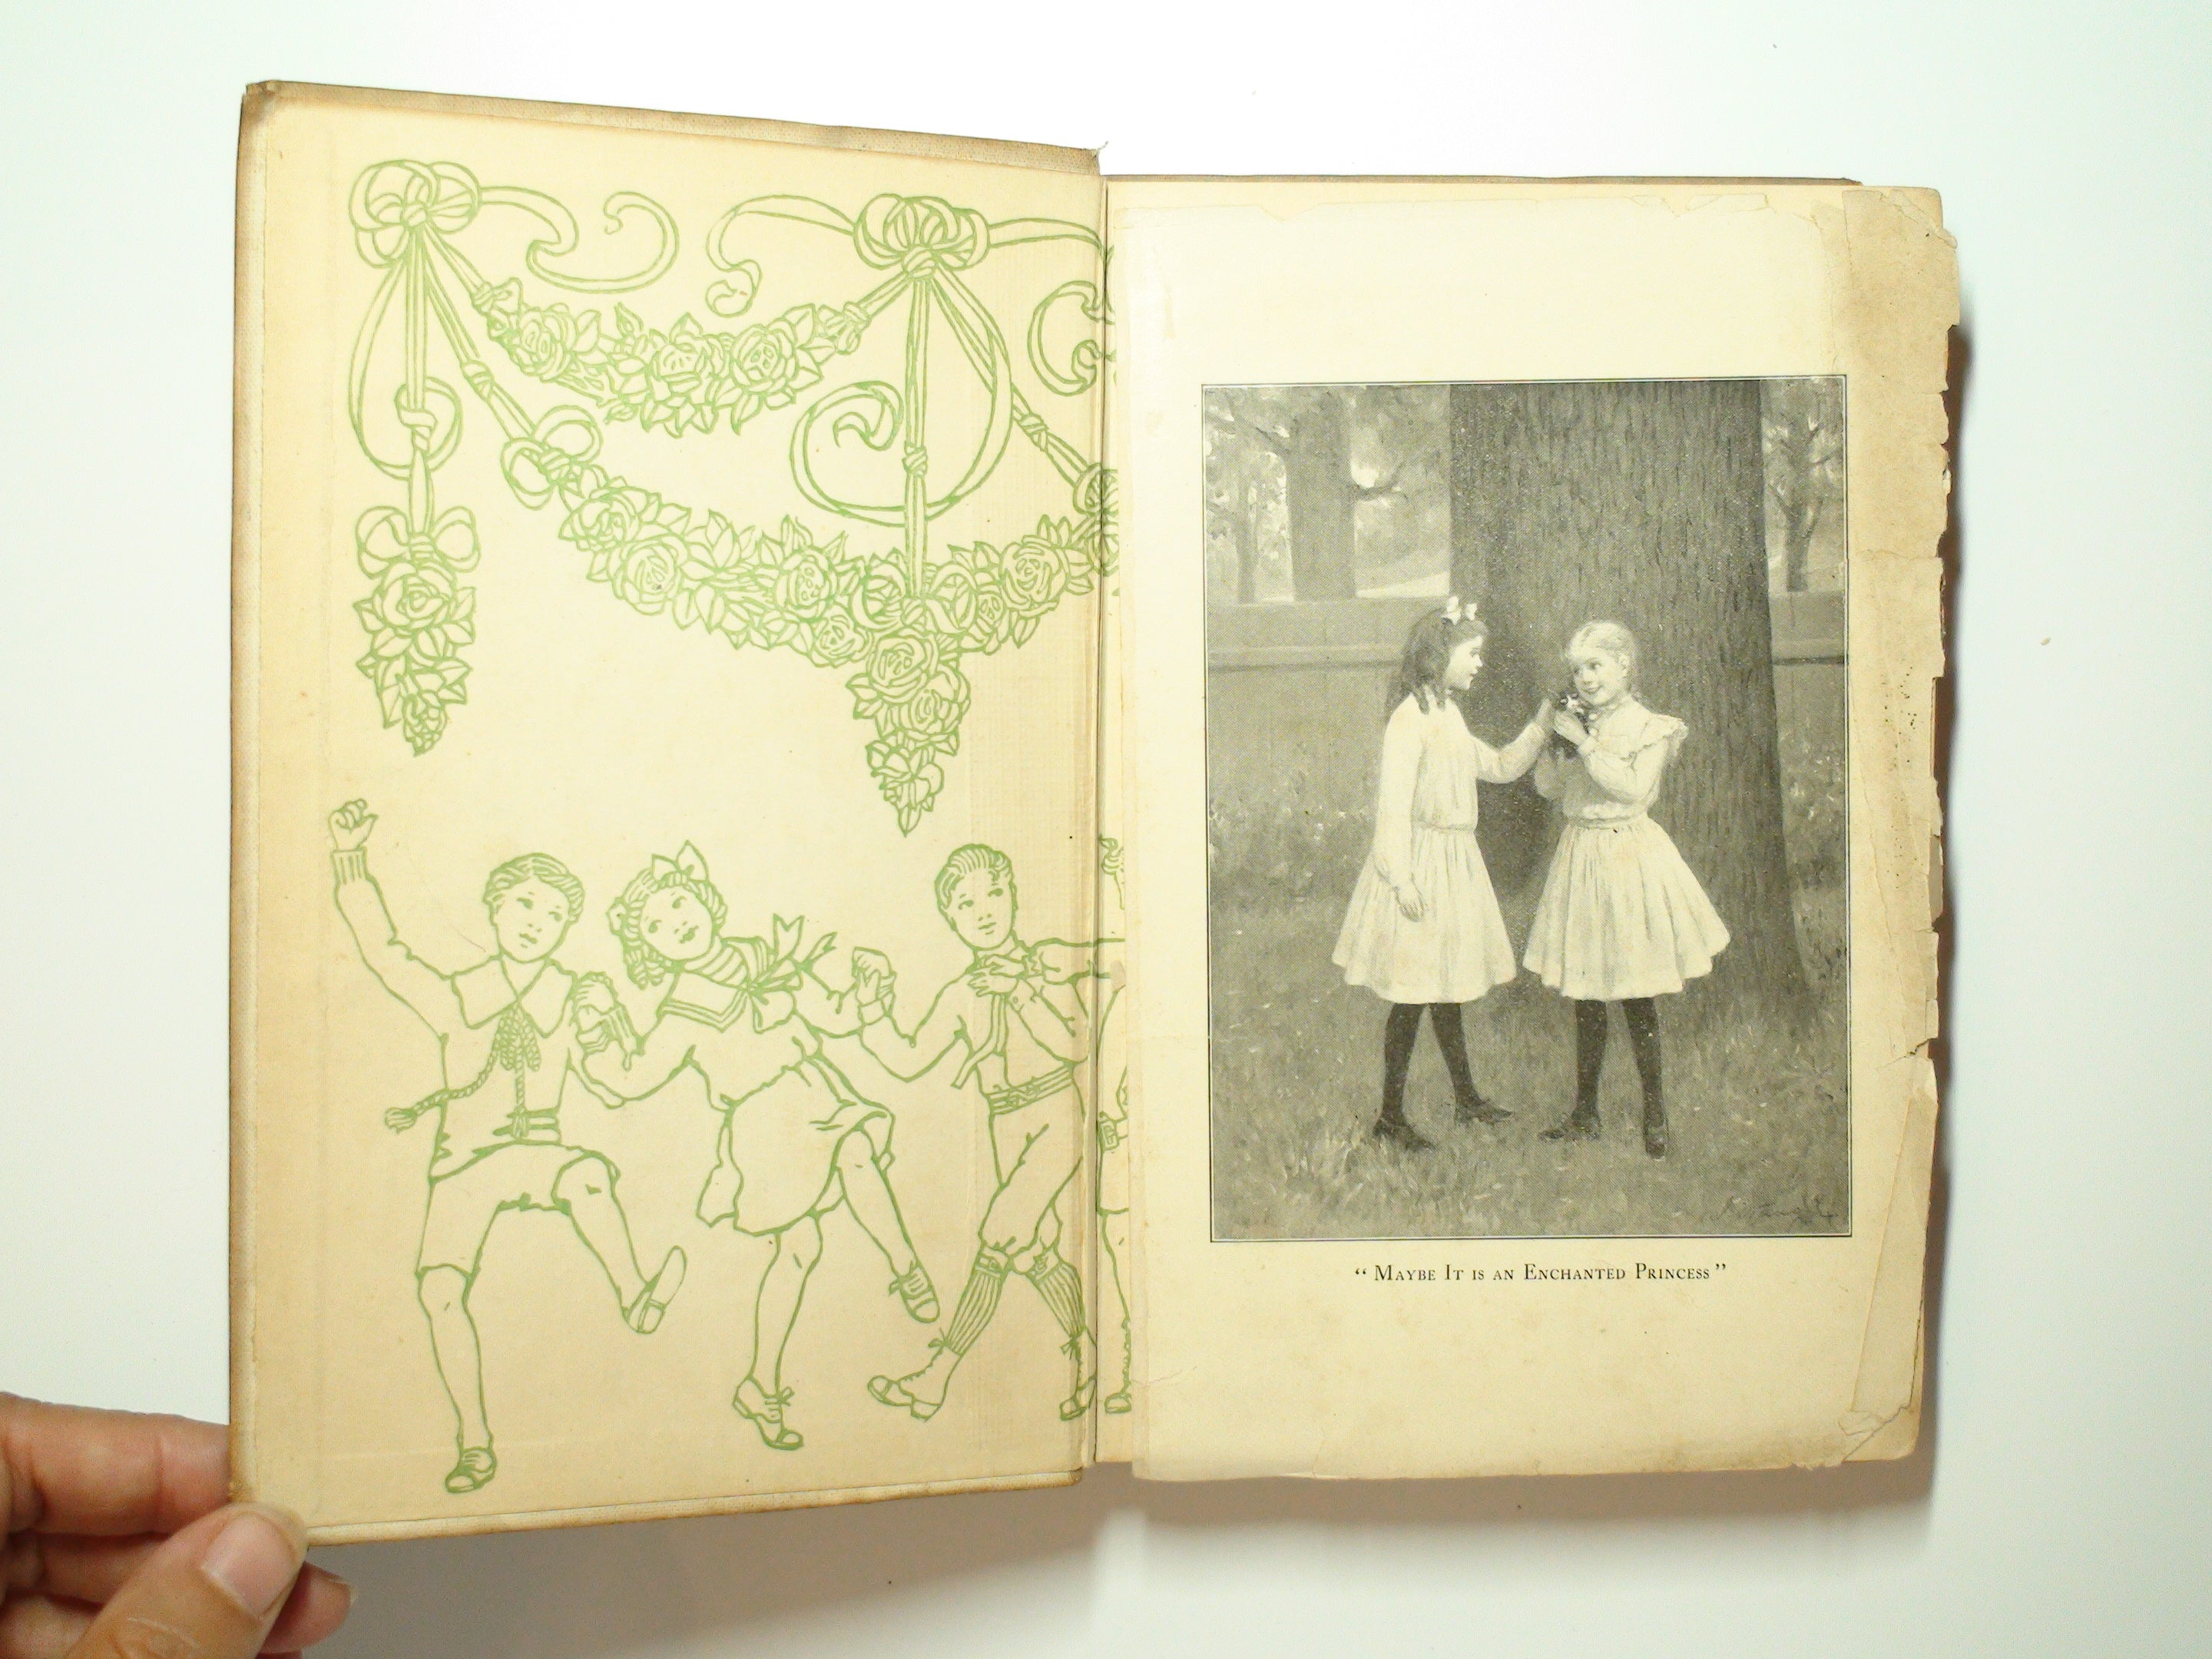 A Little Tom Boy by Amy E. Blanchard, Illustrated, 1st Ed, Children's Book, 1903